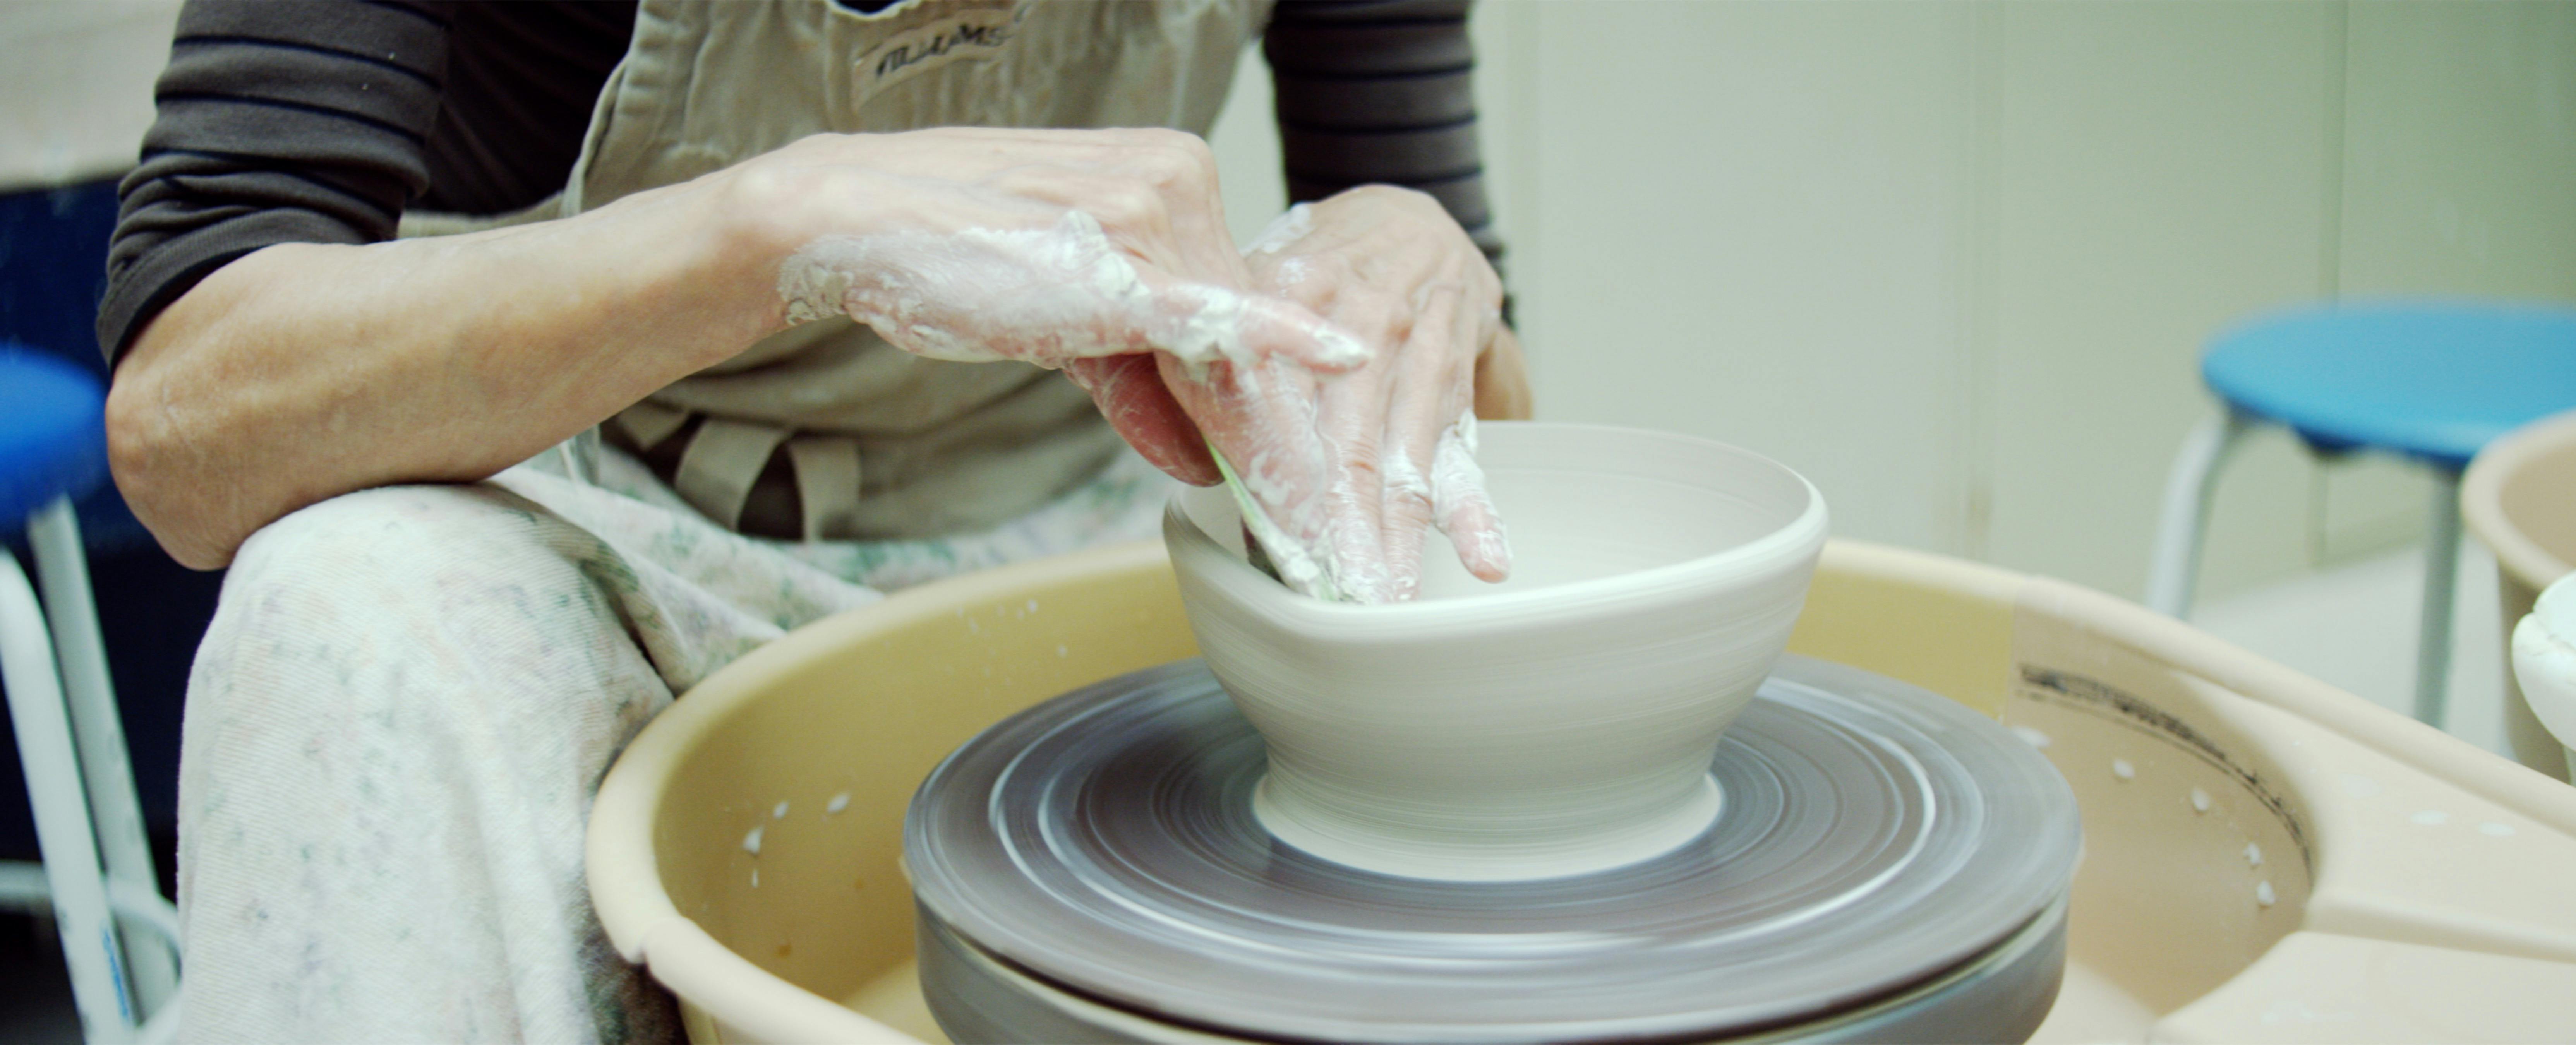 Someone on the pottery wheel